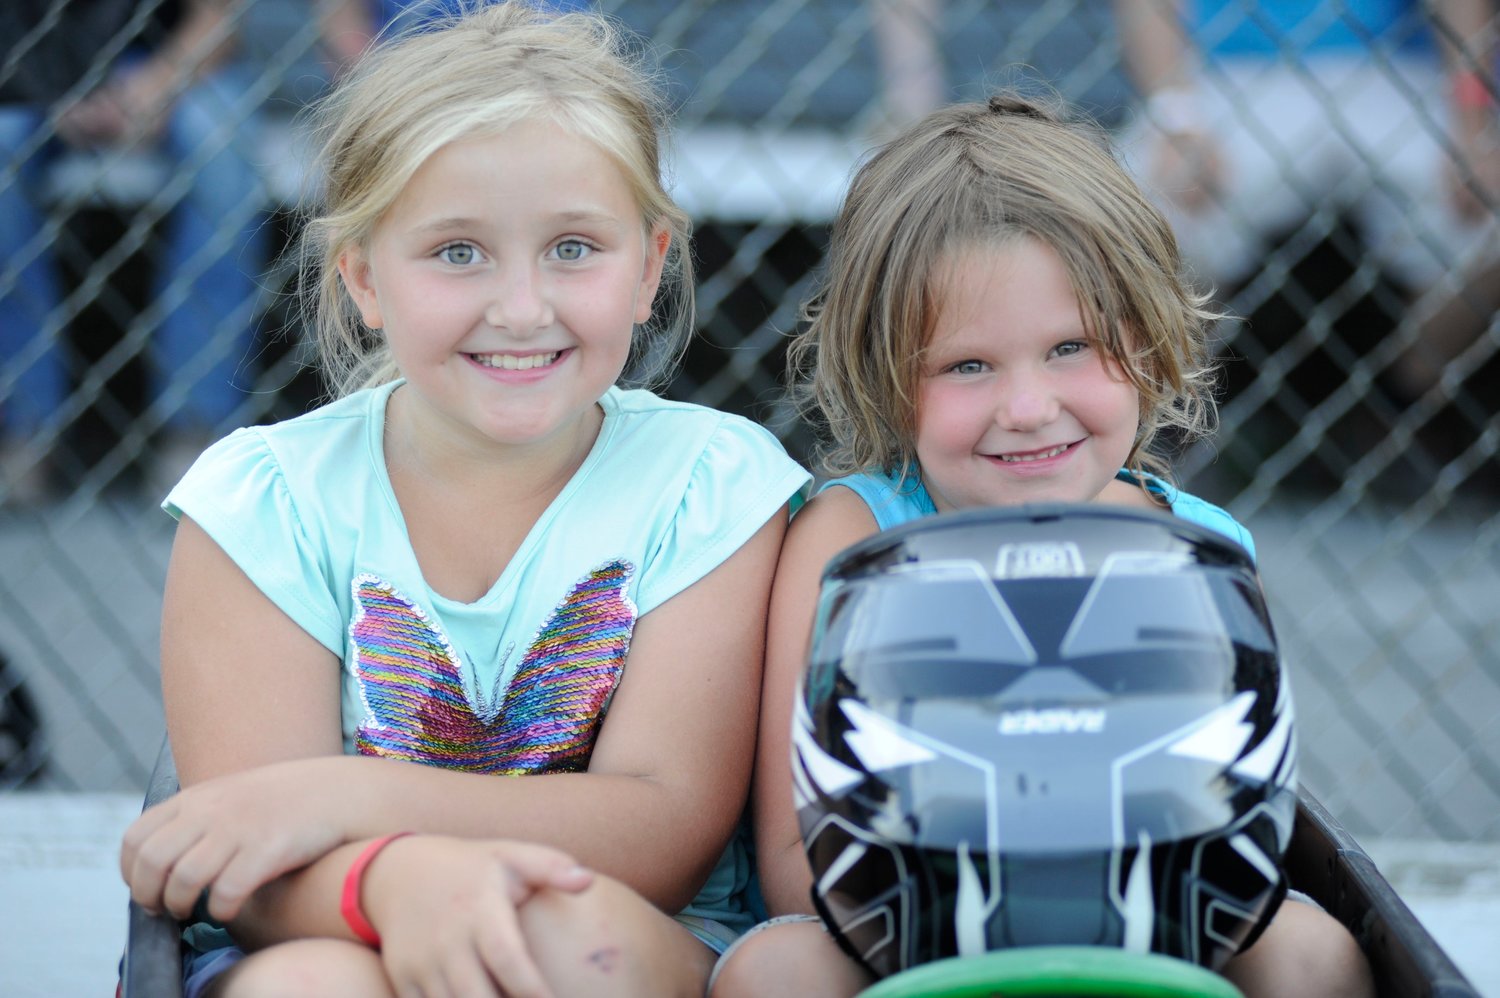 Future demo derby champs? Mackenzy Hansen, 9, and her 5-year-old sister Piper prepare to battle other youngsters in a scaled-down, kids-only version of a “demo derby.” ..